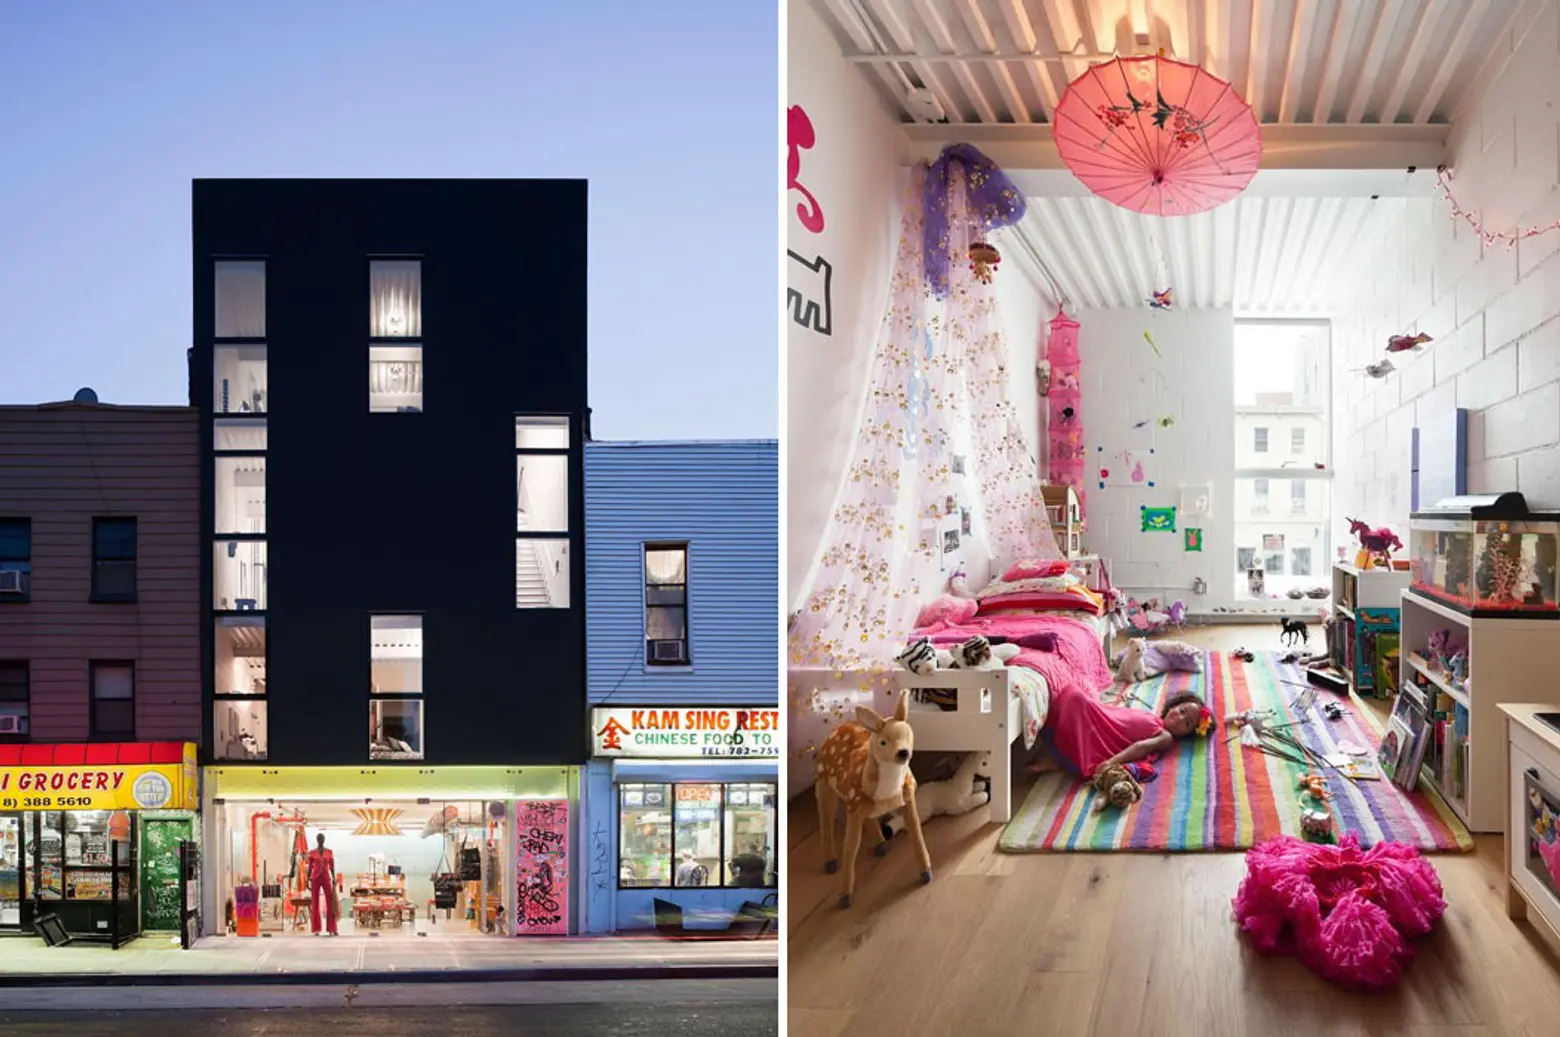 Looking at New York’s Growing Collection of LEED and Passive House Constructions